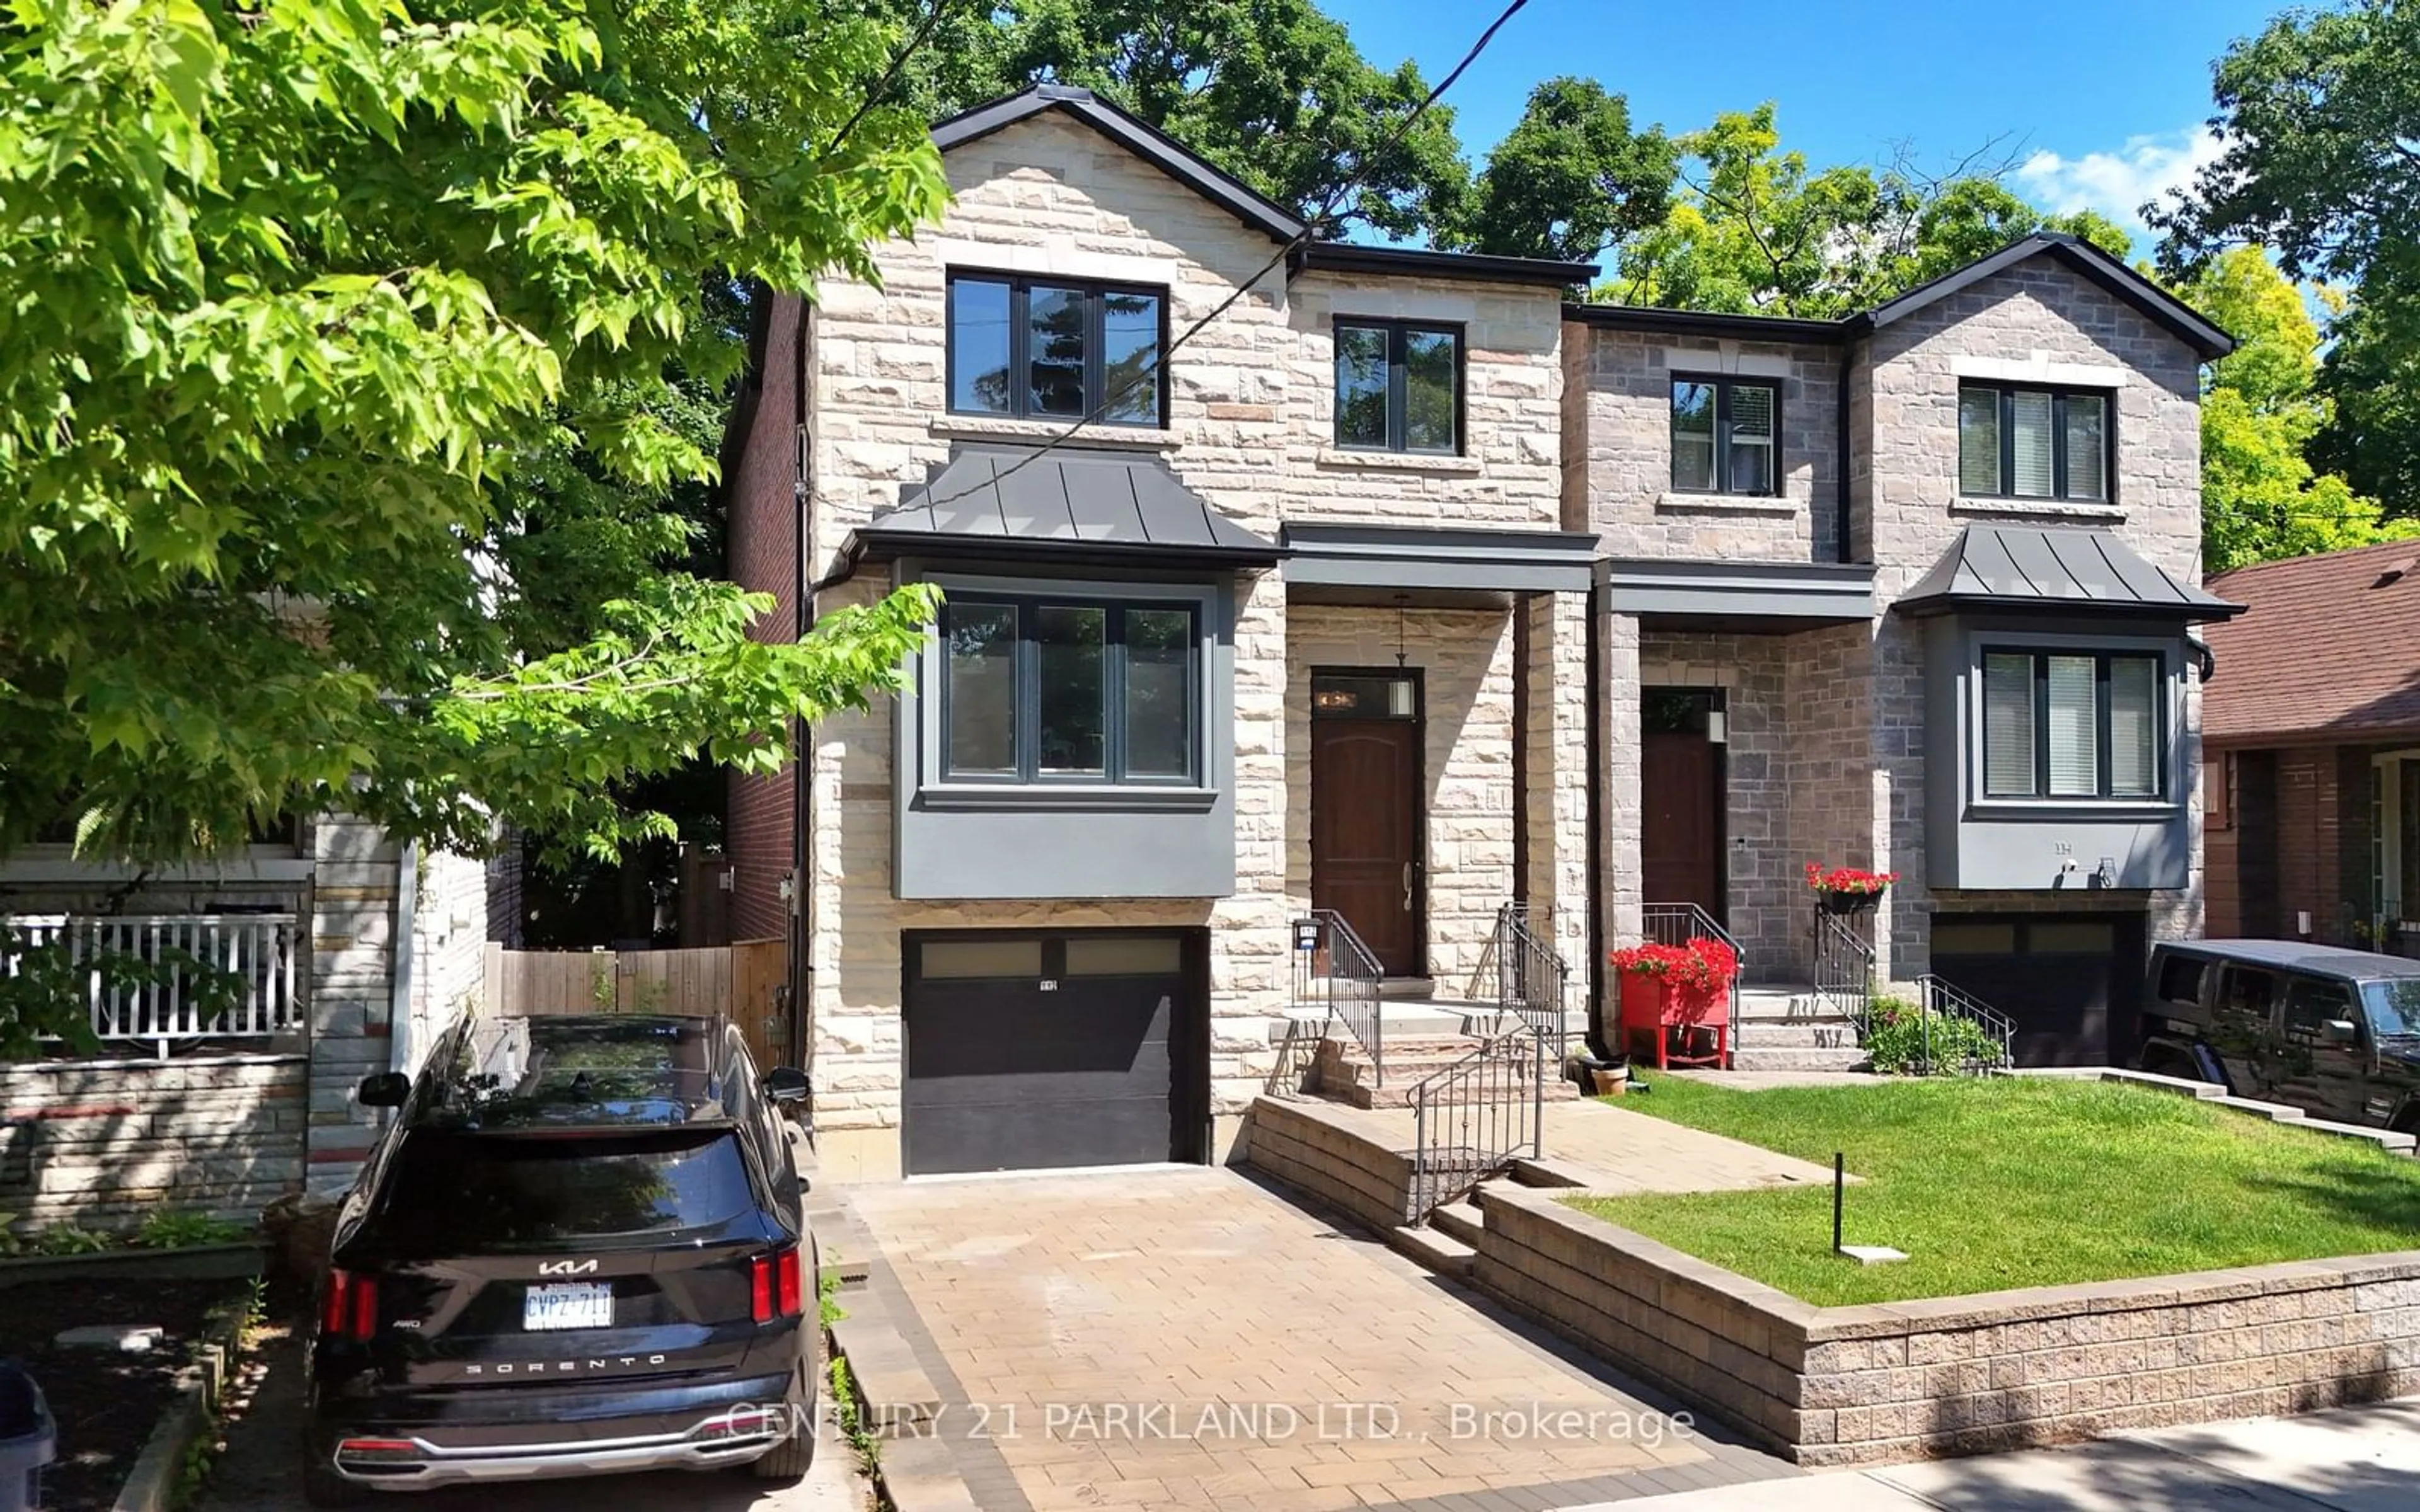 Home with brick exterior material for 112 Oakcrest Ave, Toronto Ontario M4C 1B7